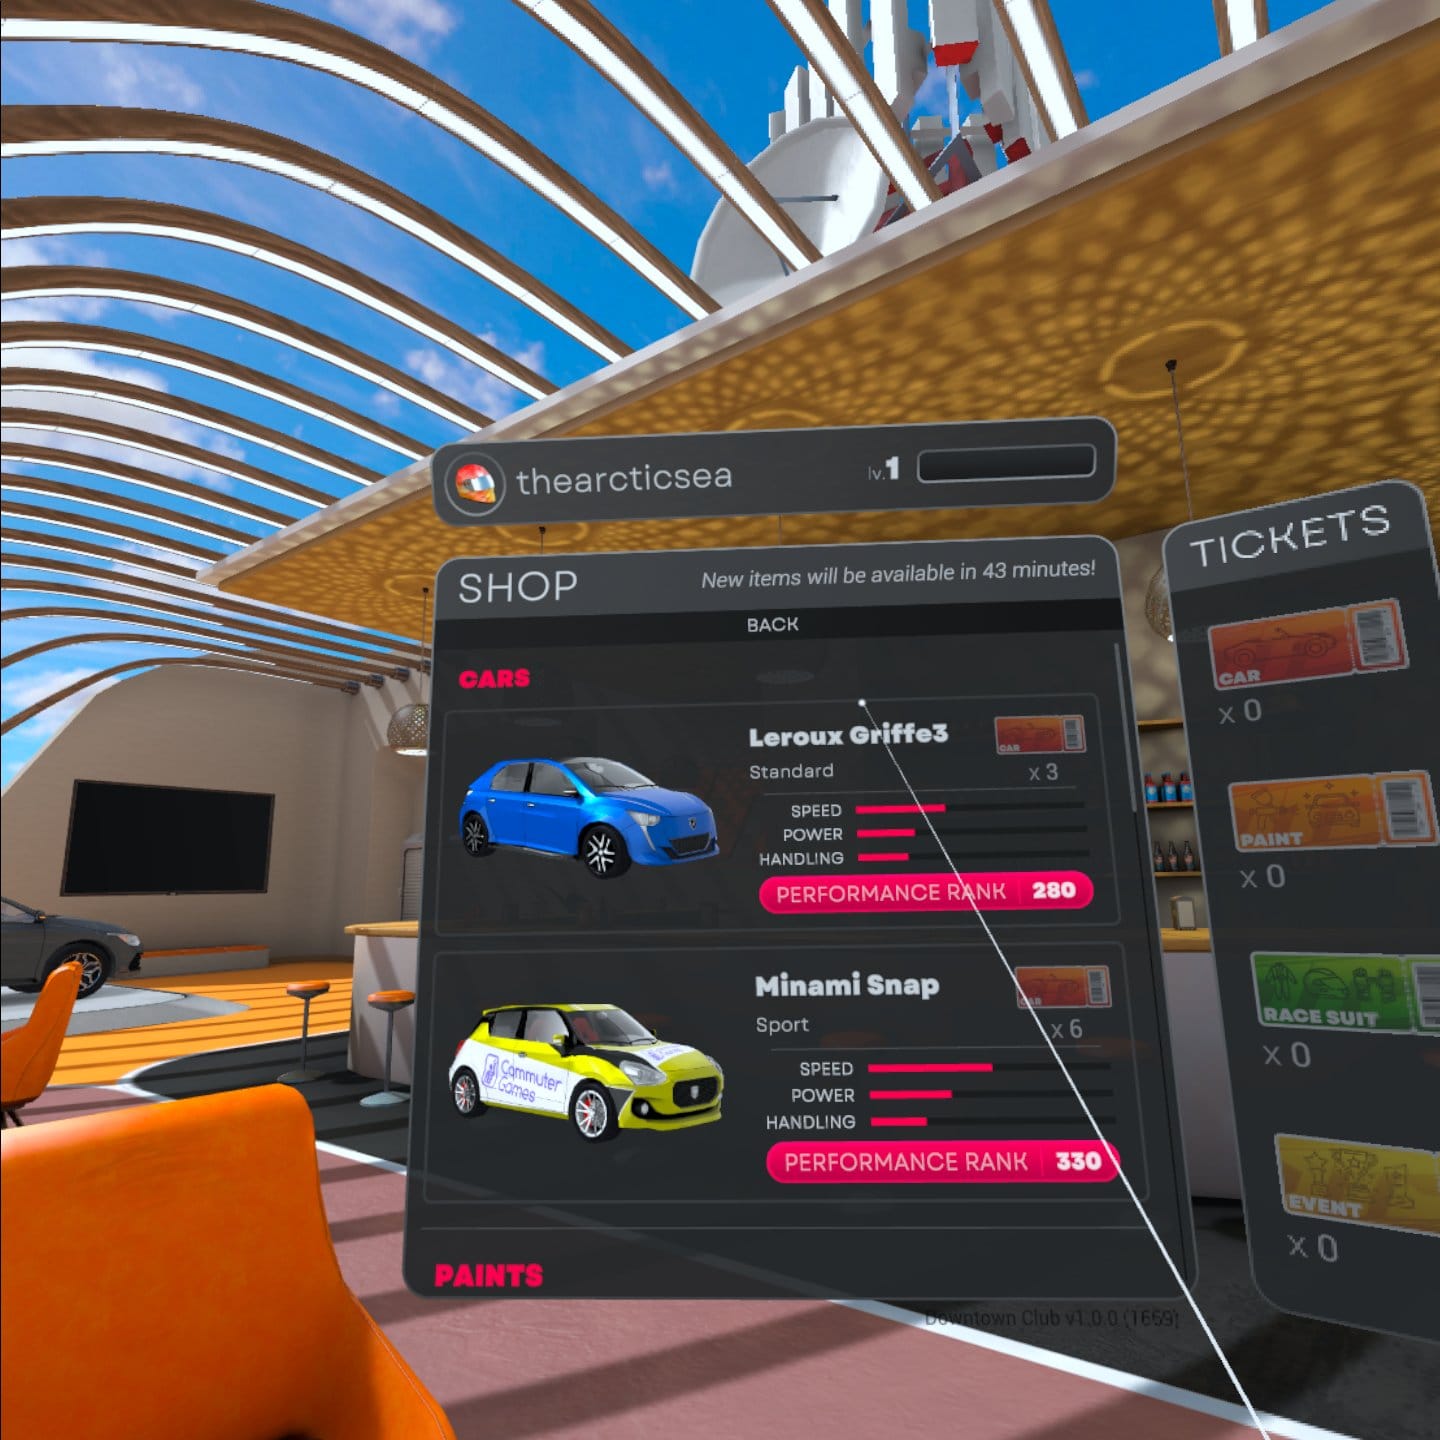 The virtual storefront in Downtown Club, which shows cars, outfits, and helmets for sale.